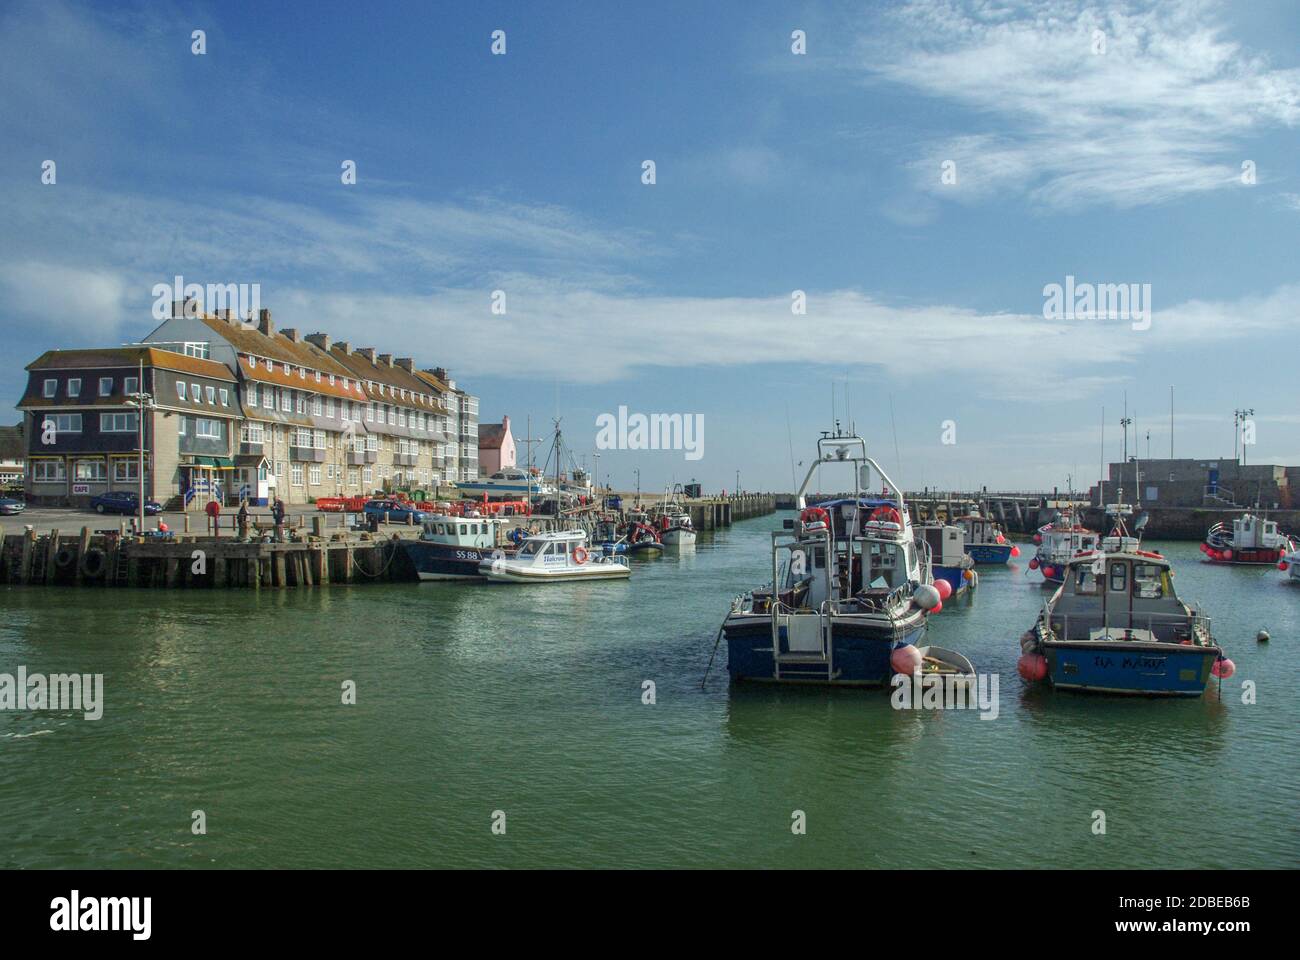 Boats and fishing boats in the harbour at West Bay, a popular West Country holiday resort; Bridport, Dorset, UK Stock Photo